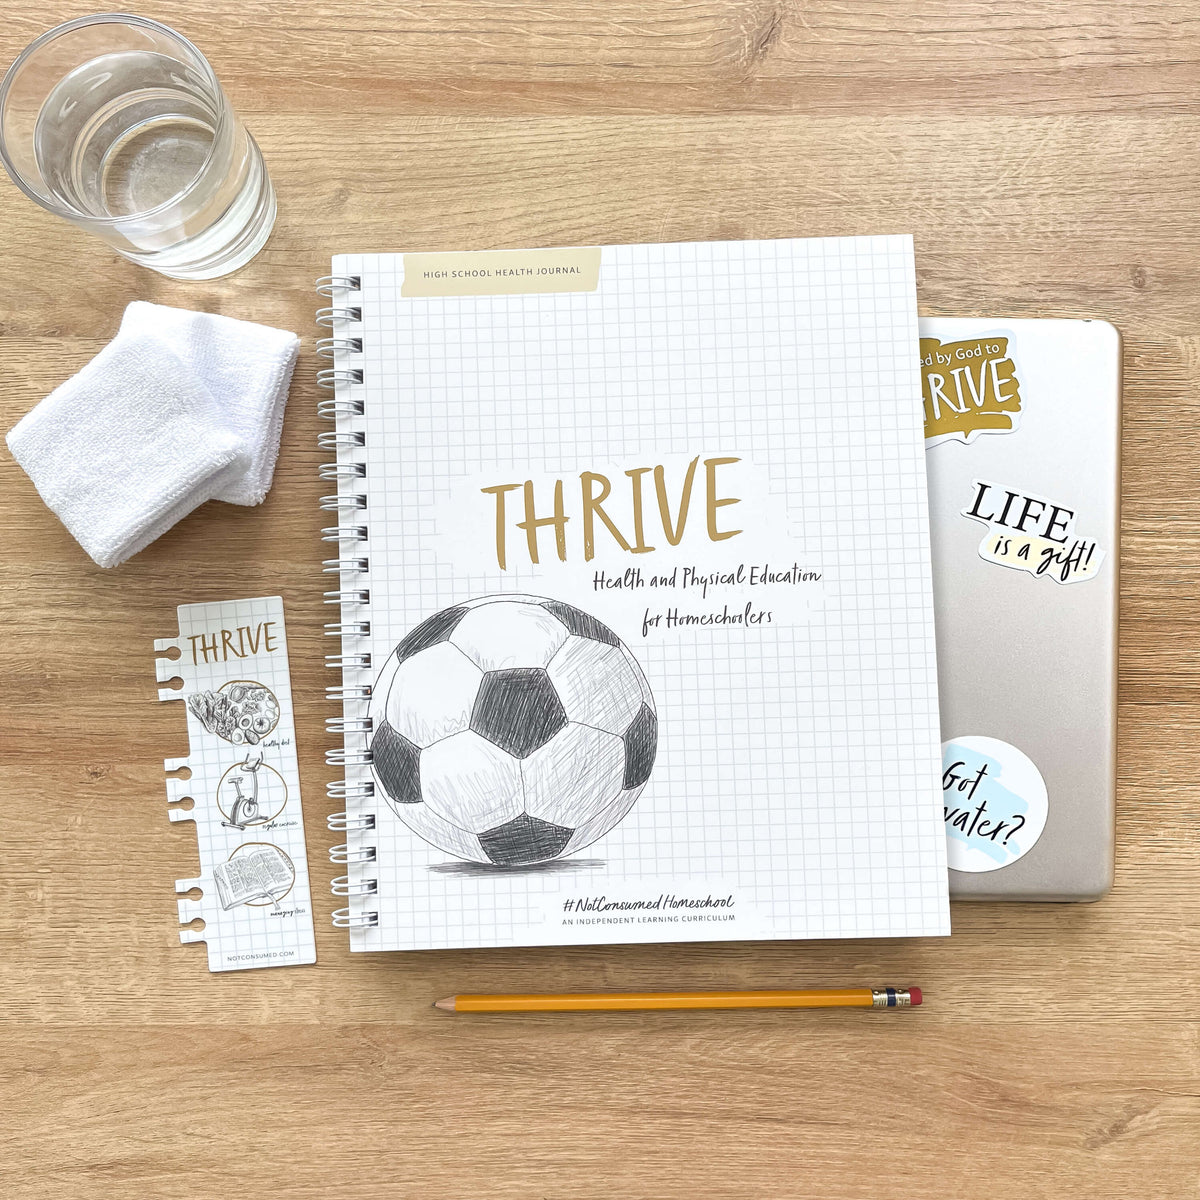 Thrive: Health and Physical Education for Homeschoolers